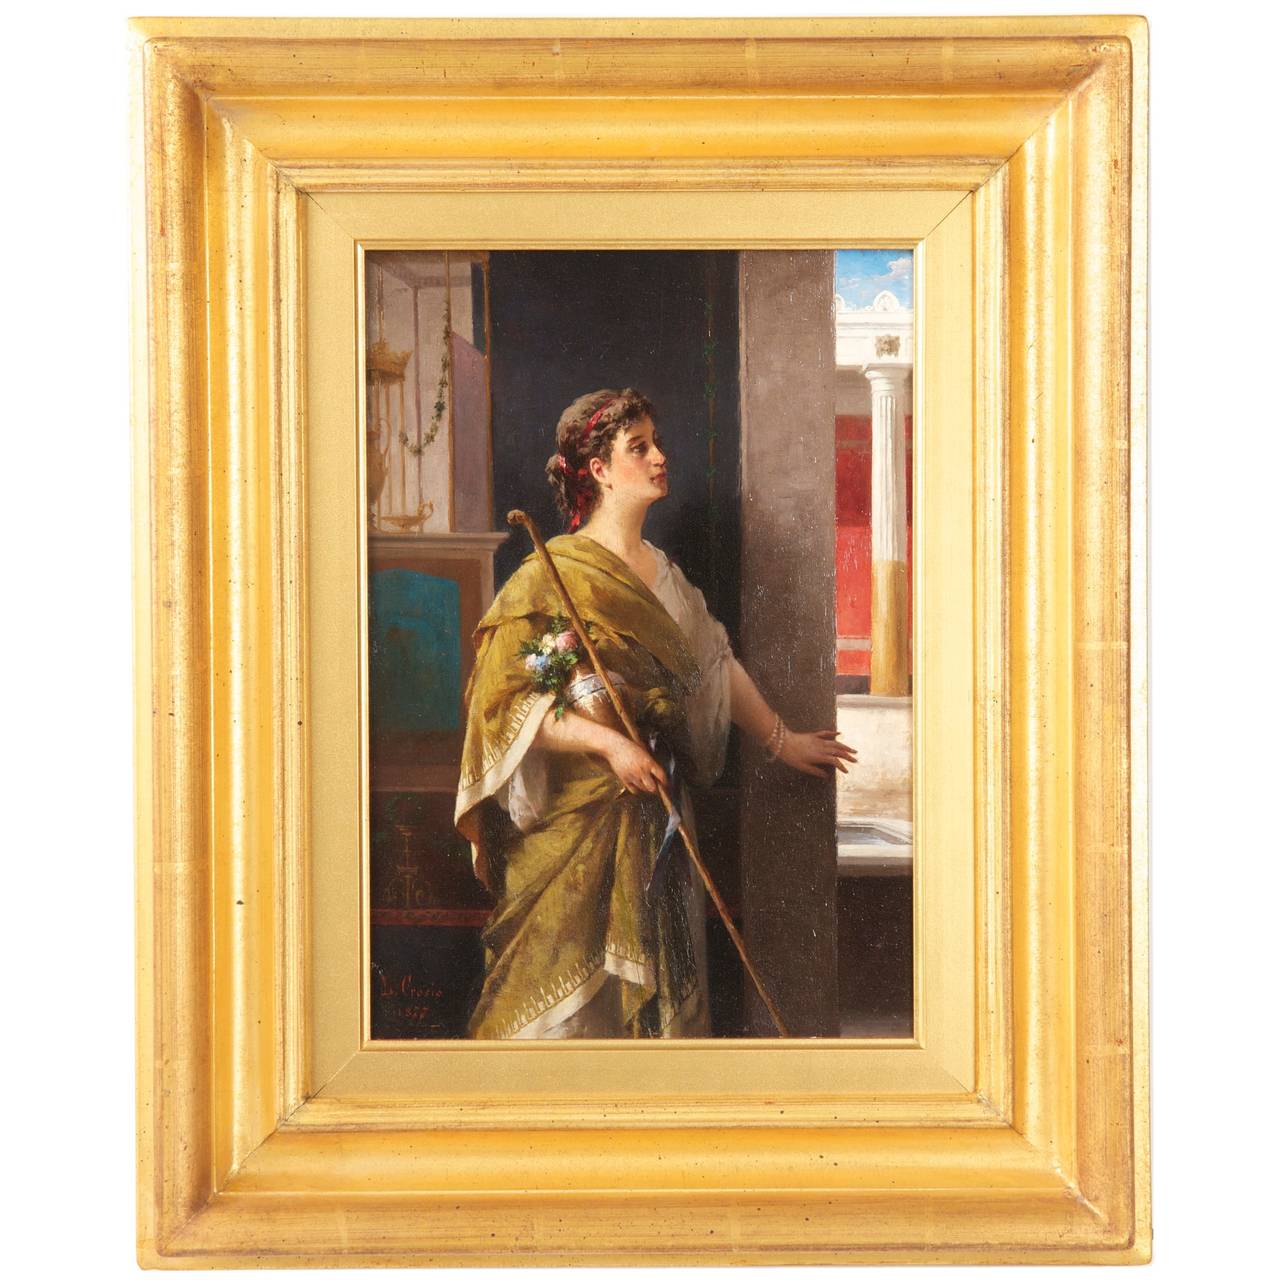 This is a very striking interior scene by Italian artist Luigi Crosio, capturing a Roman woman as she stares out an open doorway at the Pompeiian architecture of the courtyard. She is exquisitely dressed with flowing robes of green and cream over a